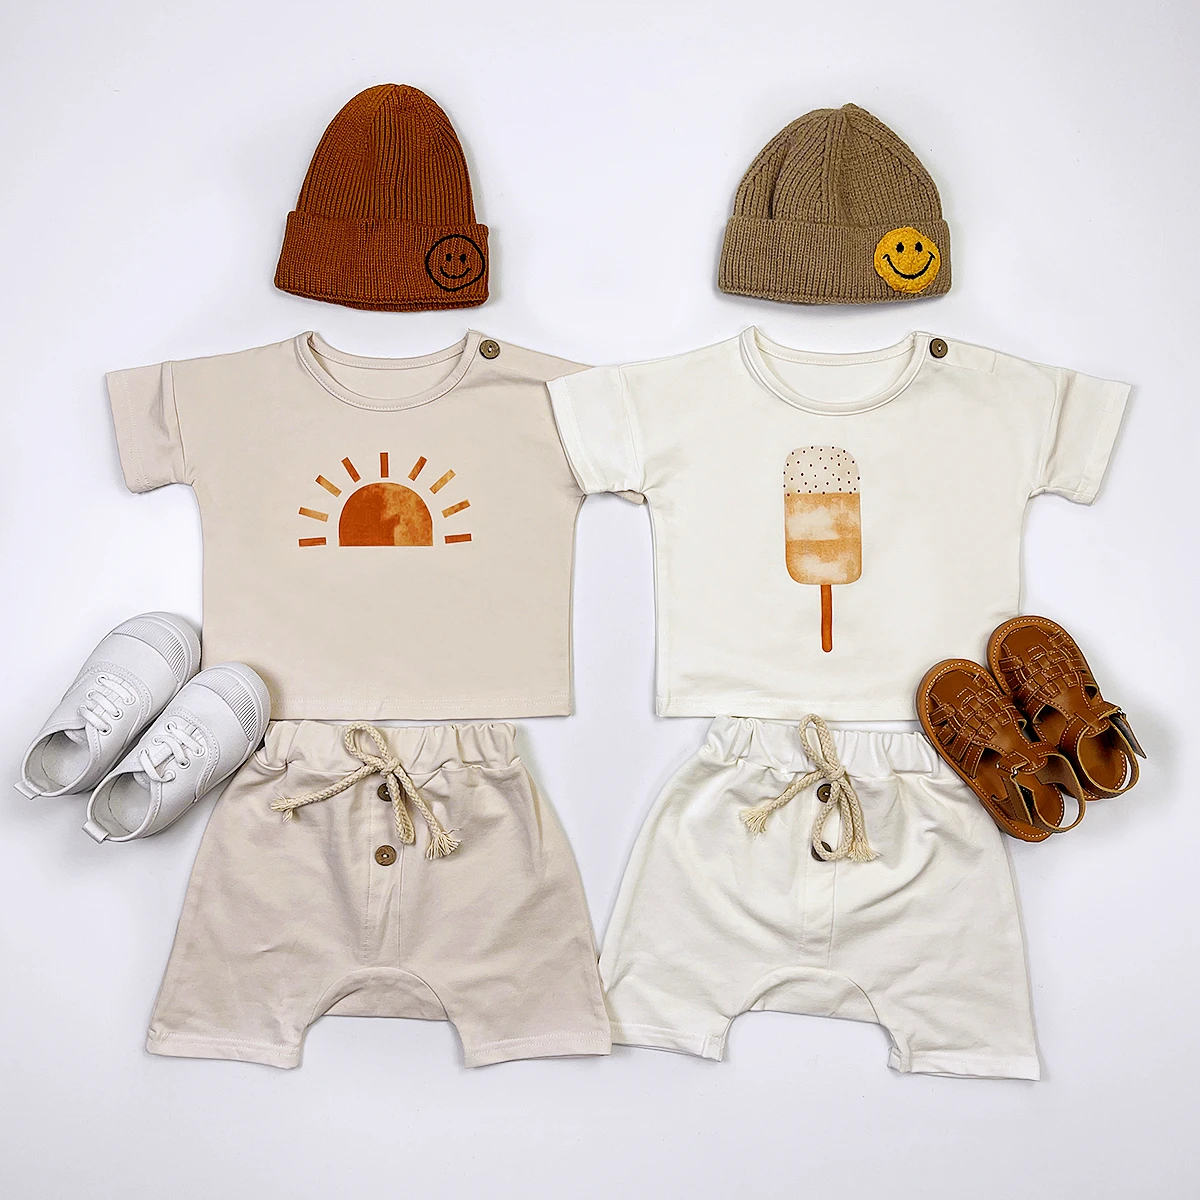 baby dress and set Summer Baby Boy Clothes Set Organic Cotton Ice Cream Tee Baby Girls Clothing Sets Children's T-shirt+Shorts Pants Newborn Bebes Baby Clothing Set discount